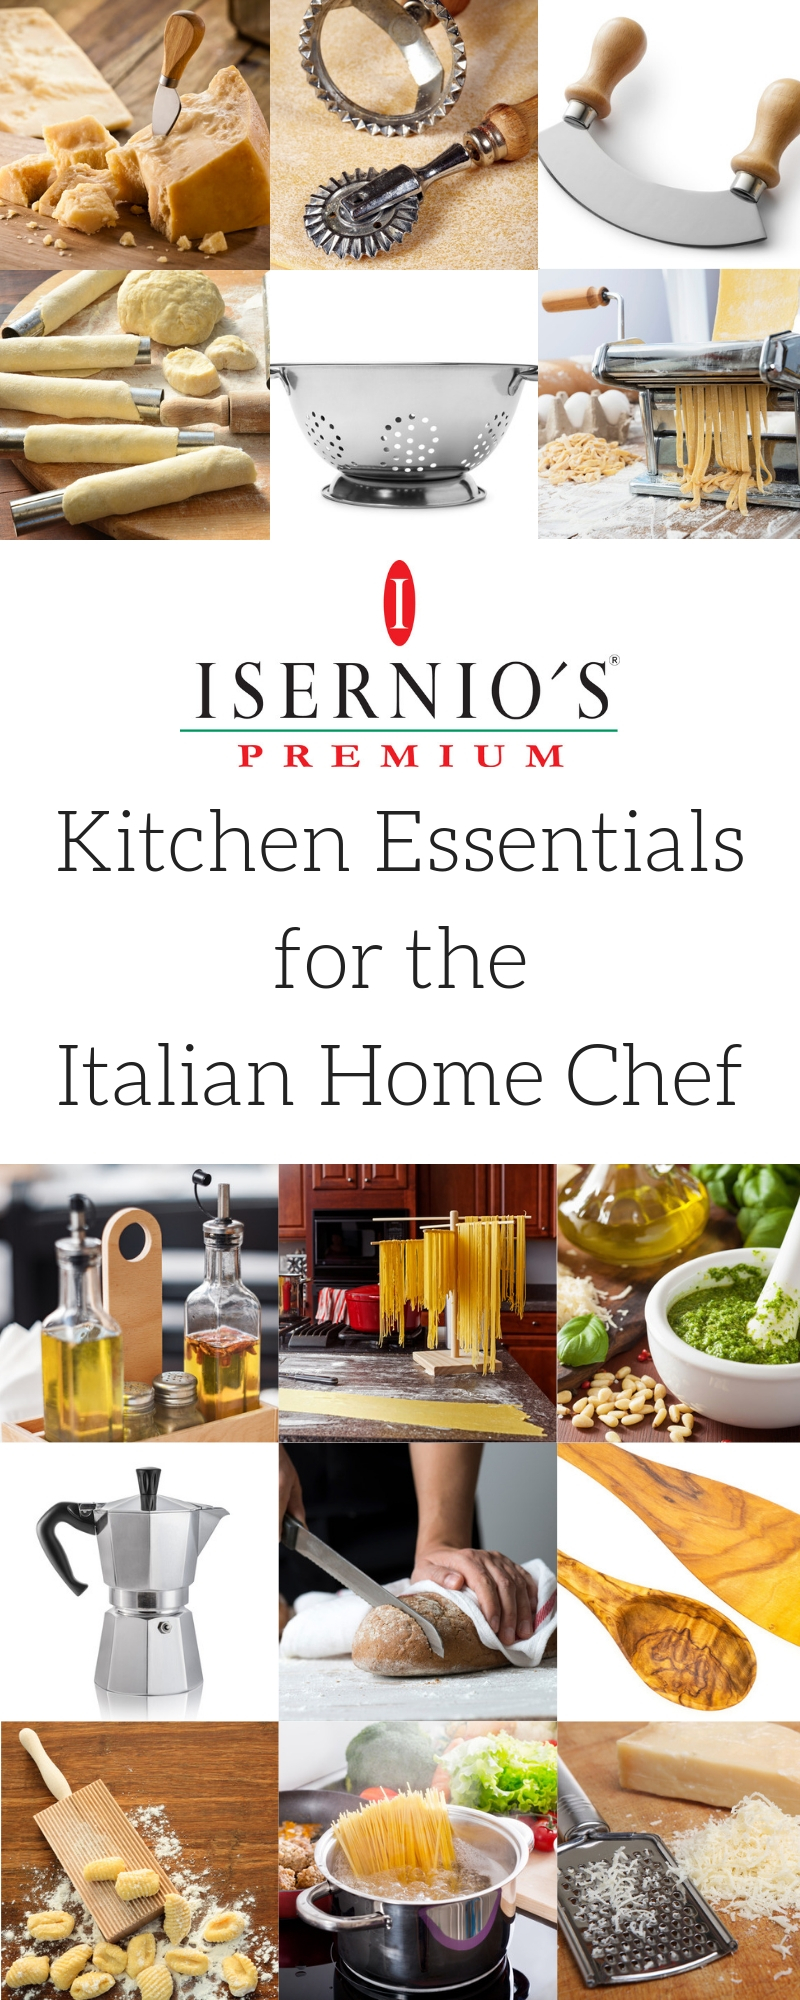 https://isernio.com/wp-content/uploads/2018/11/Kitchen-Tools-for-the-Italian-Home-Cook.jpg